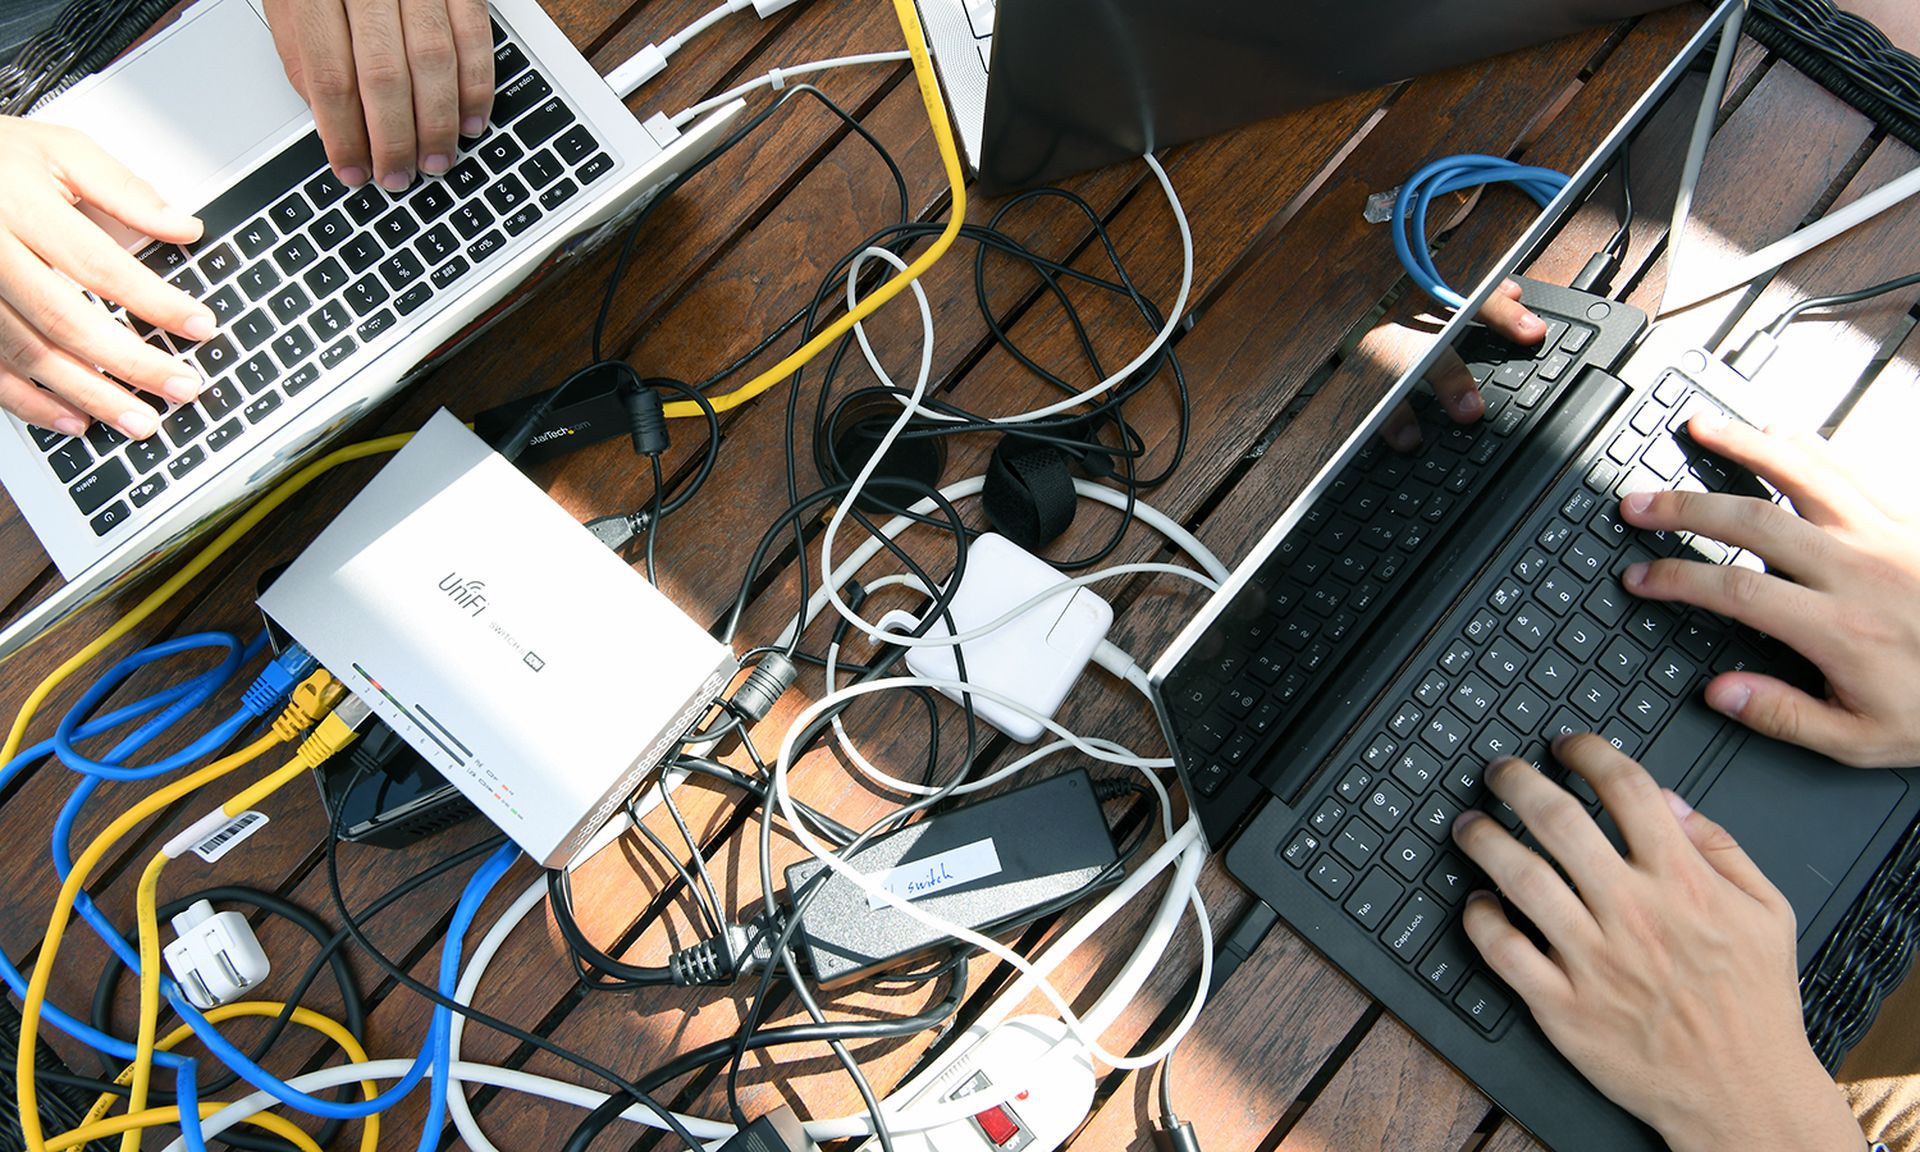 Laptops, chords and wifi and power chords are seen on a table top.